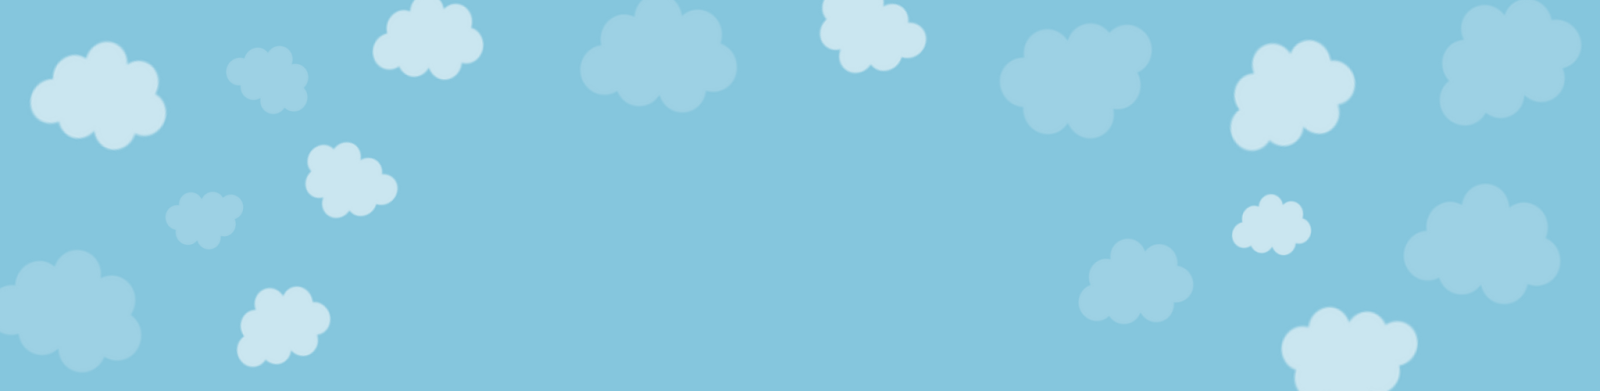 Graphic clouds on a light blue background